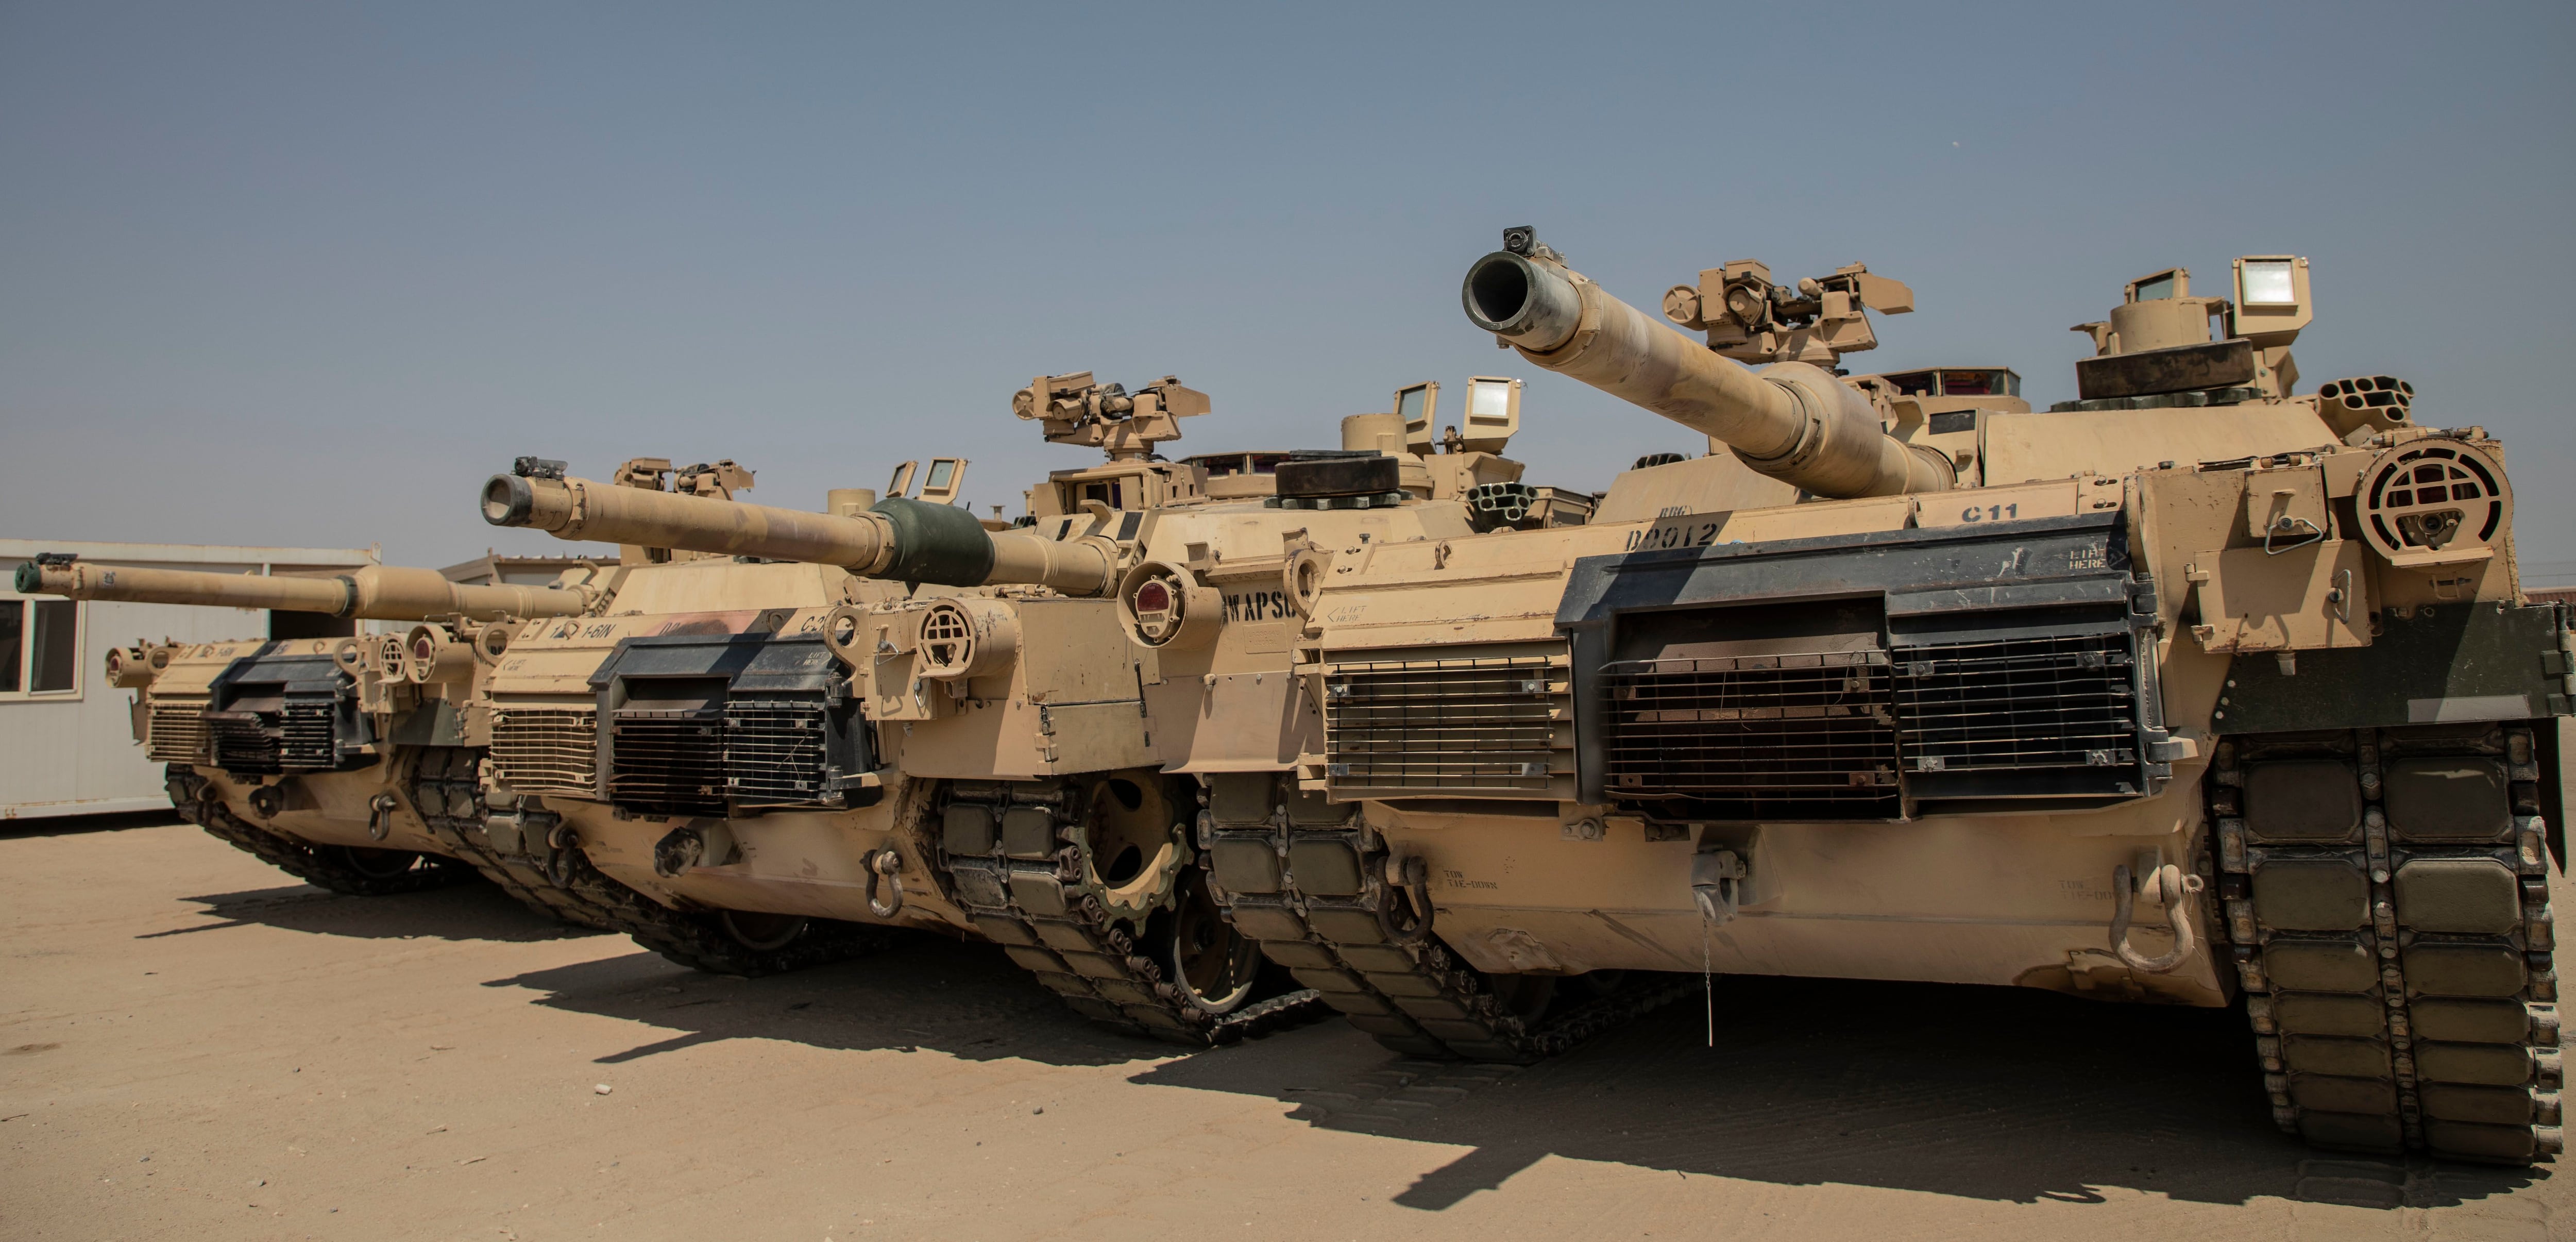 An M1A2 Abrams Tank, assigned to 1st Battalion, 6th Infantry Regiment, 2nd Brigade Combat Team, 1st Armored Division in support of Operation Spartan Shield, is staged at Ali Al Salem Airbase in Kuwait on Sept. 14, 2020, during a load out exercise. (Spc. Jorge Reyes/Army)